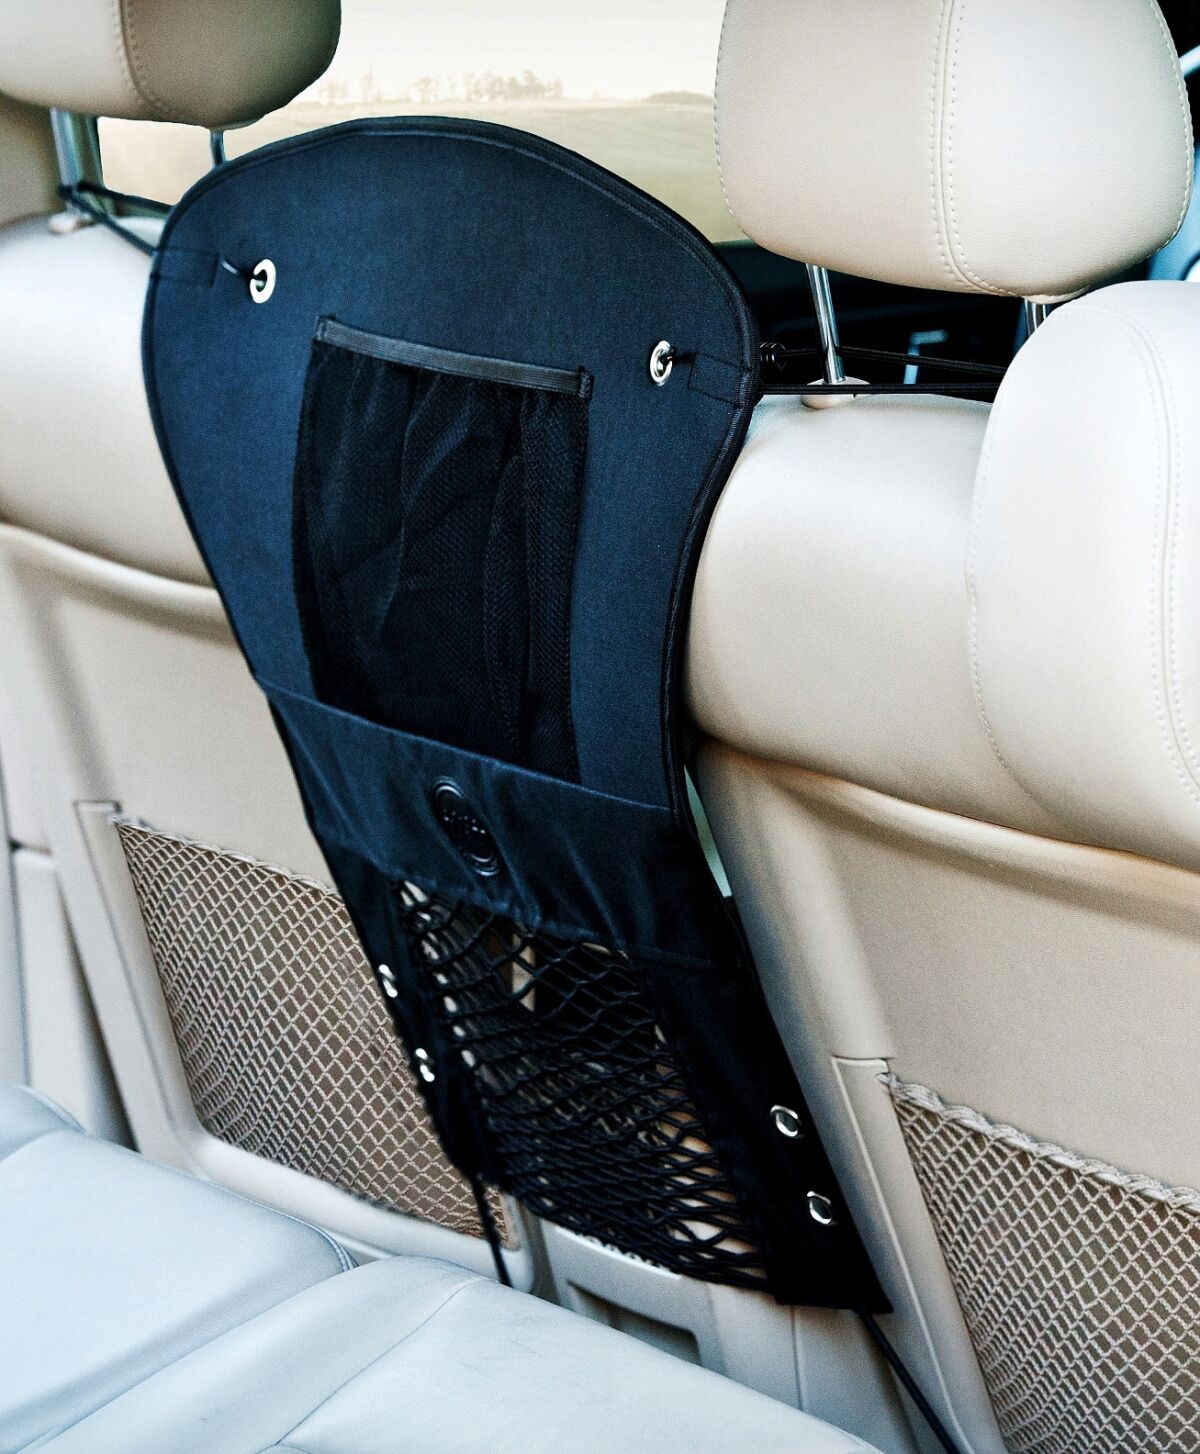 K&H Car Travel Safety Barrier attaches via elastic bungee cords that hook around the headrests and under the back of the front car seats.